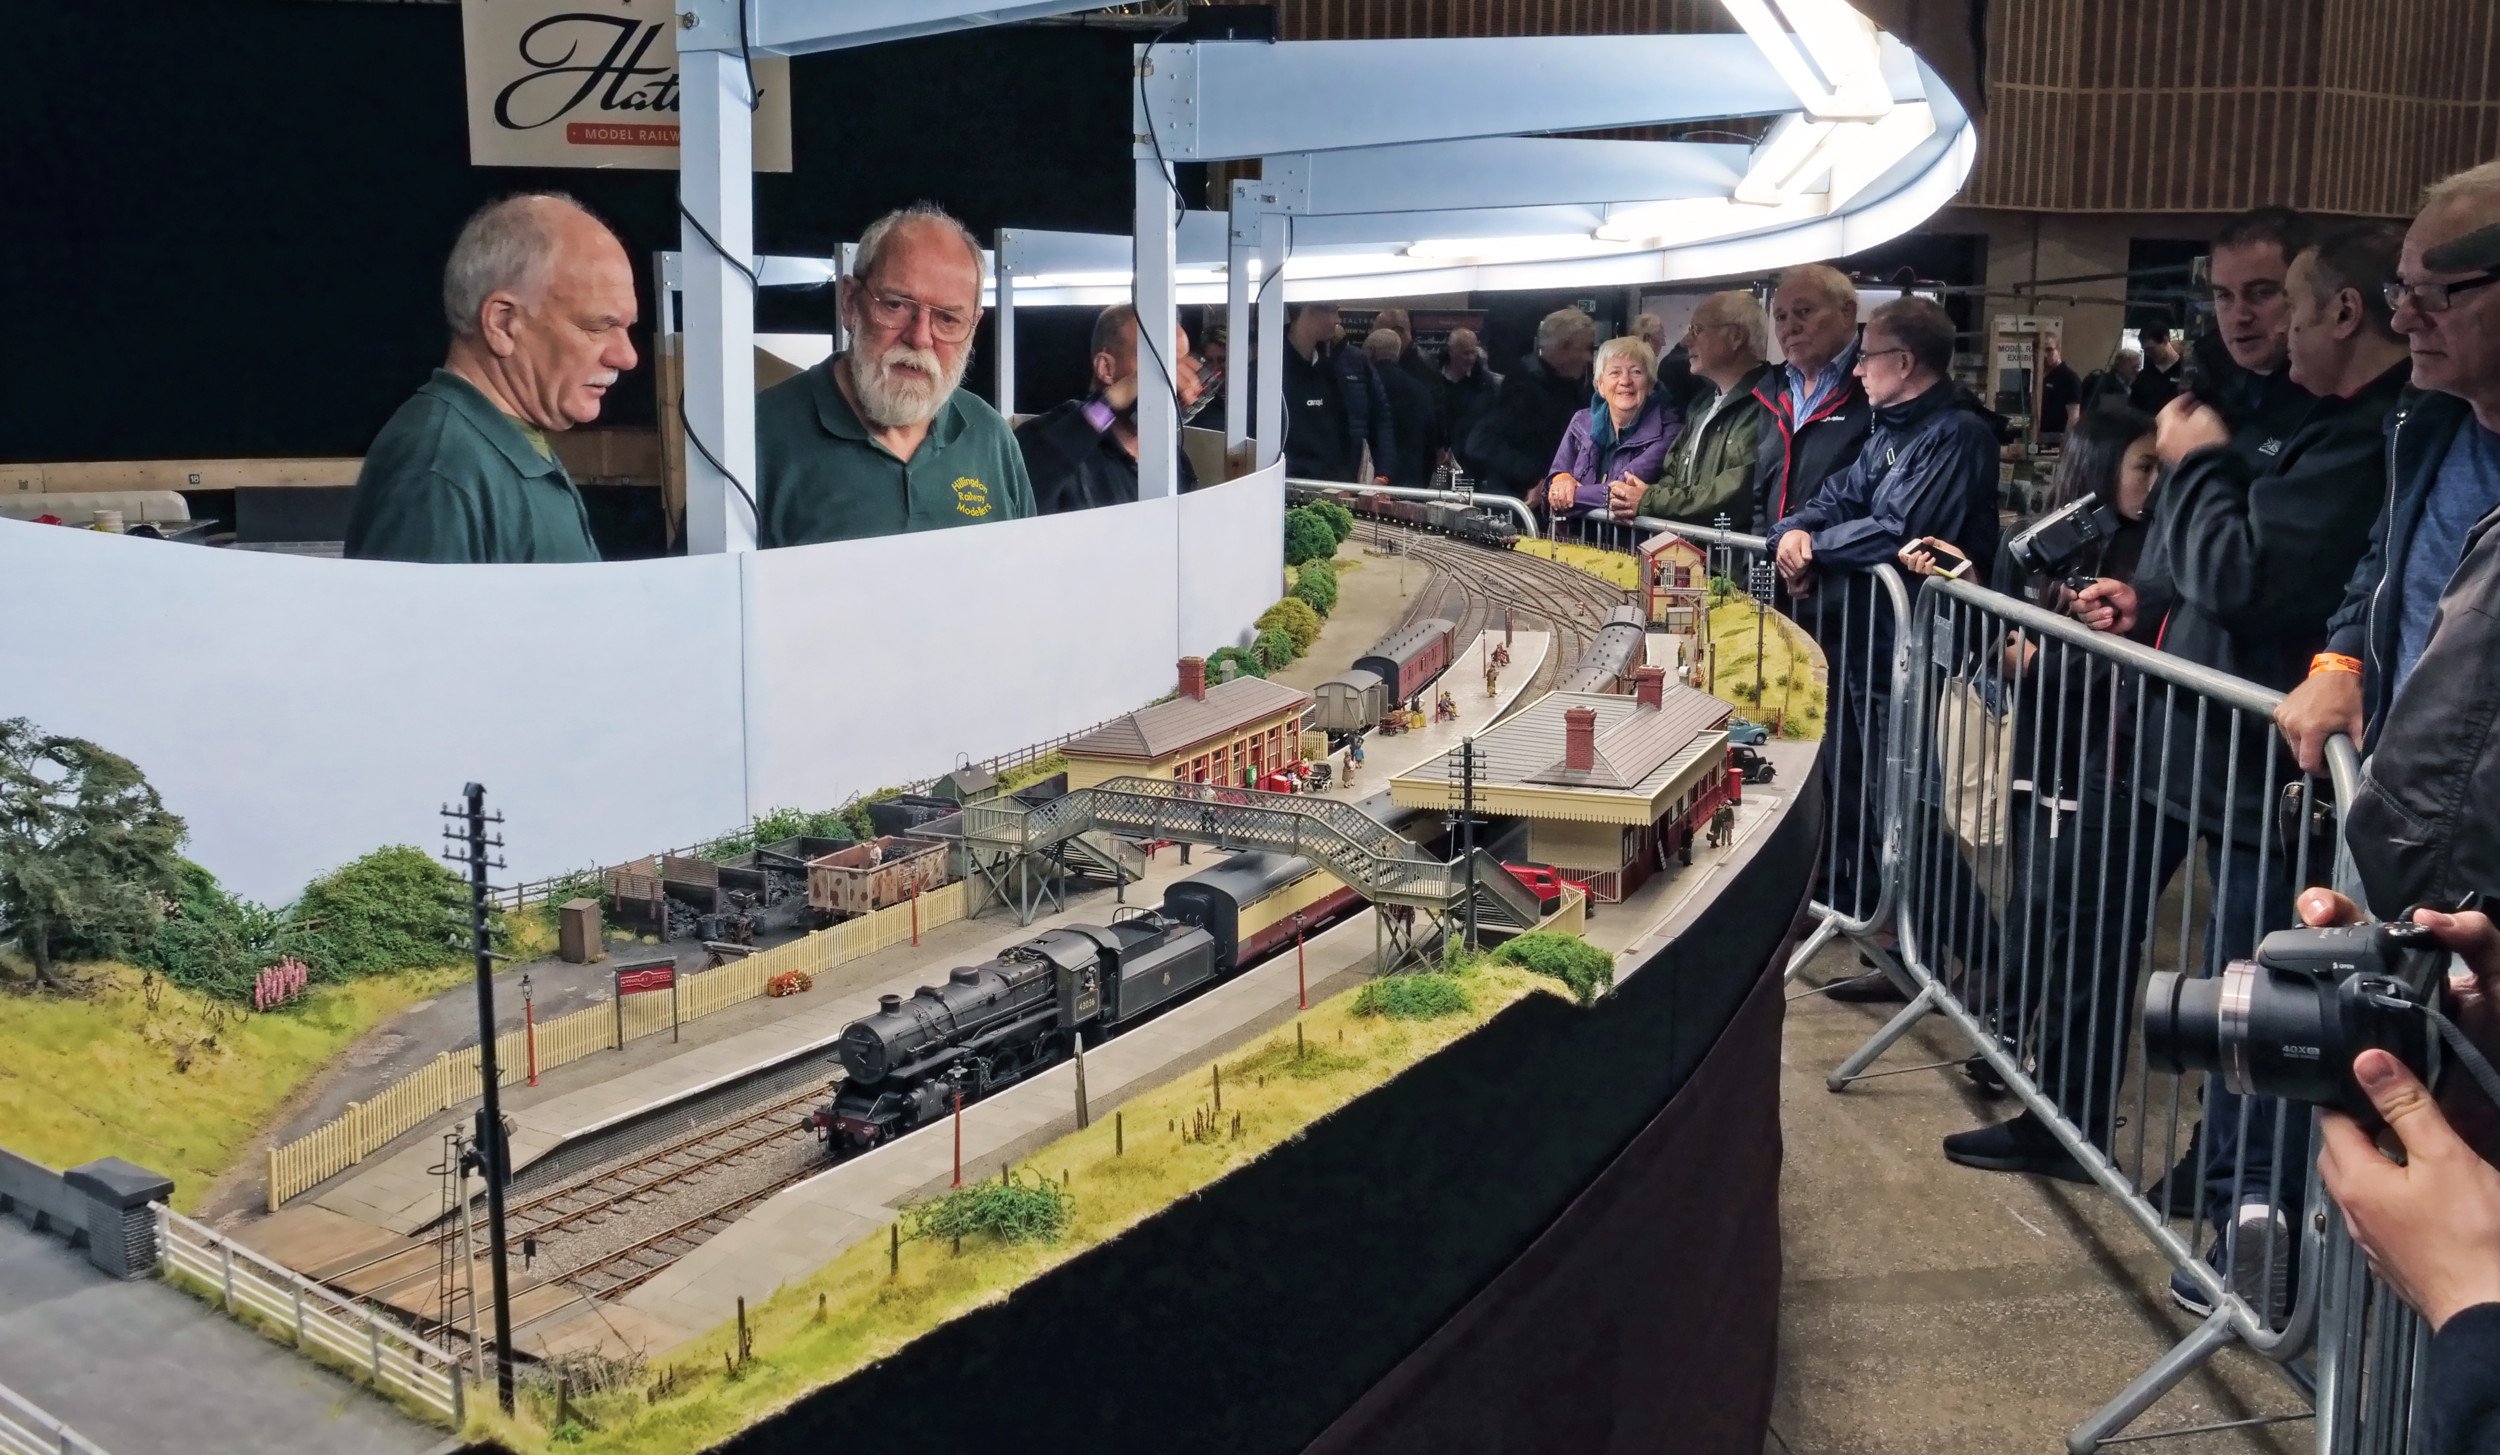 The Great Electric Train Show offers the chance to get up close with featured layouts from the pages of Hornby Magazine and Key Model World.